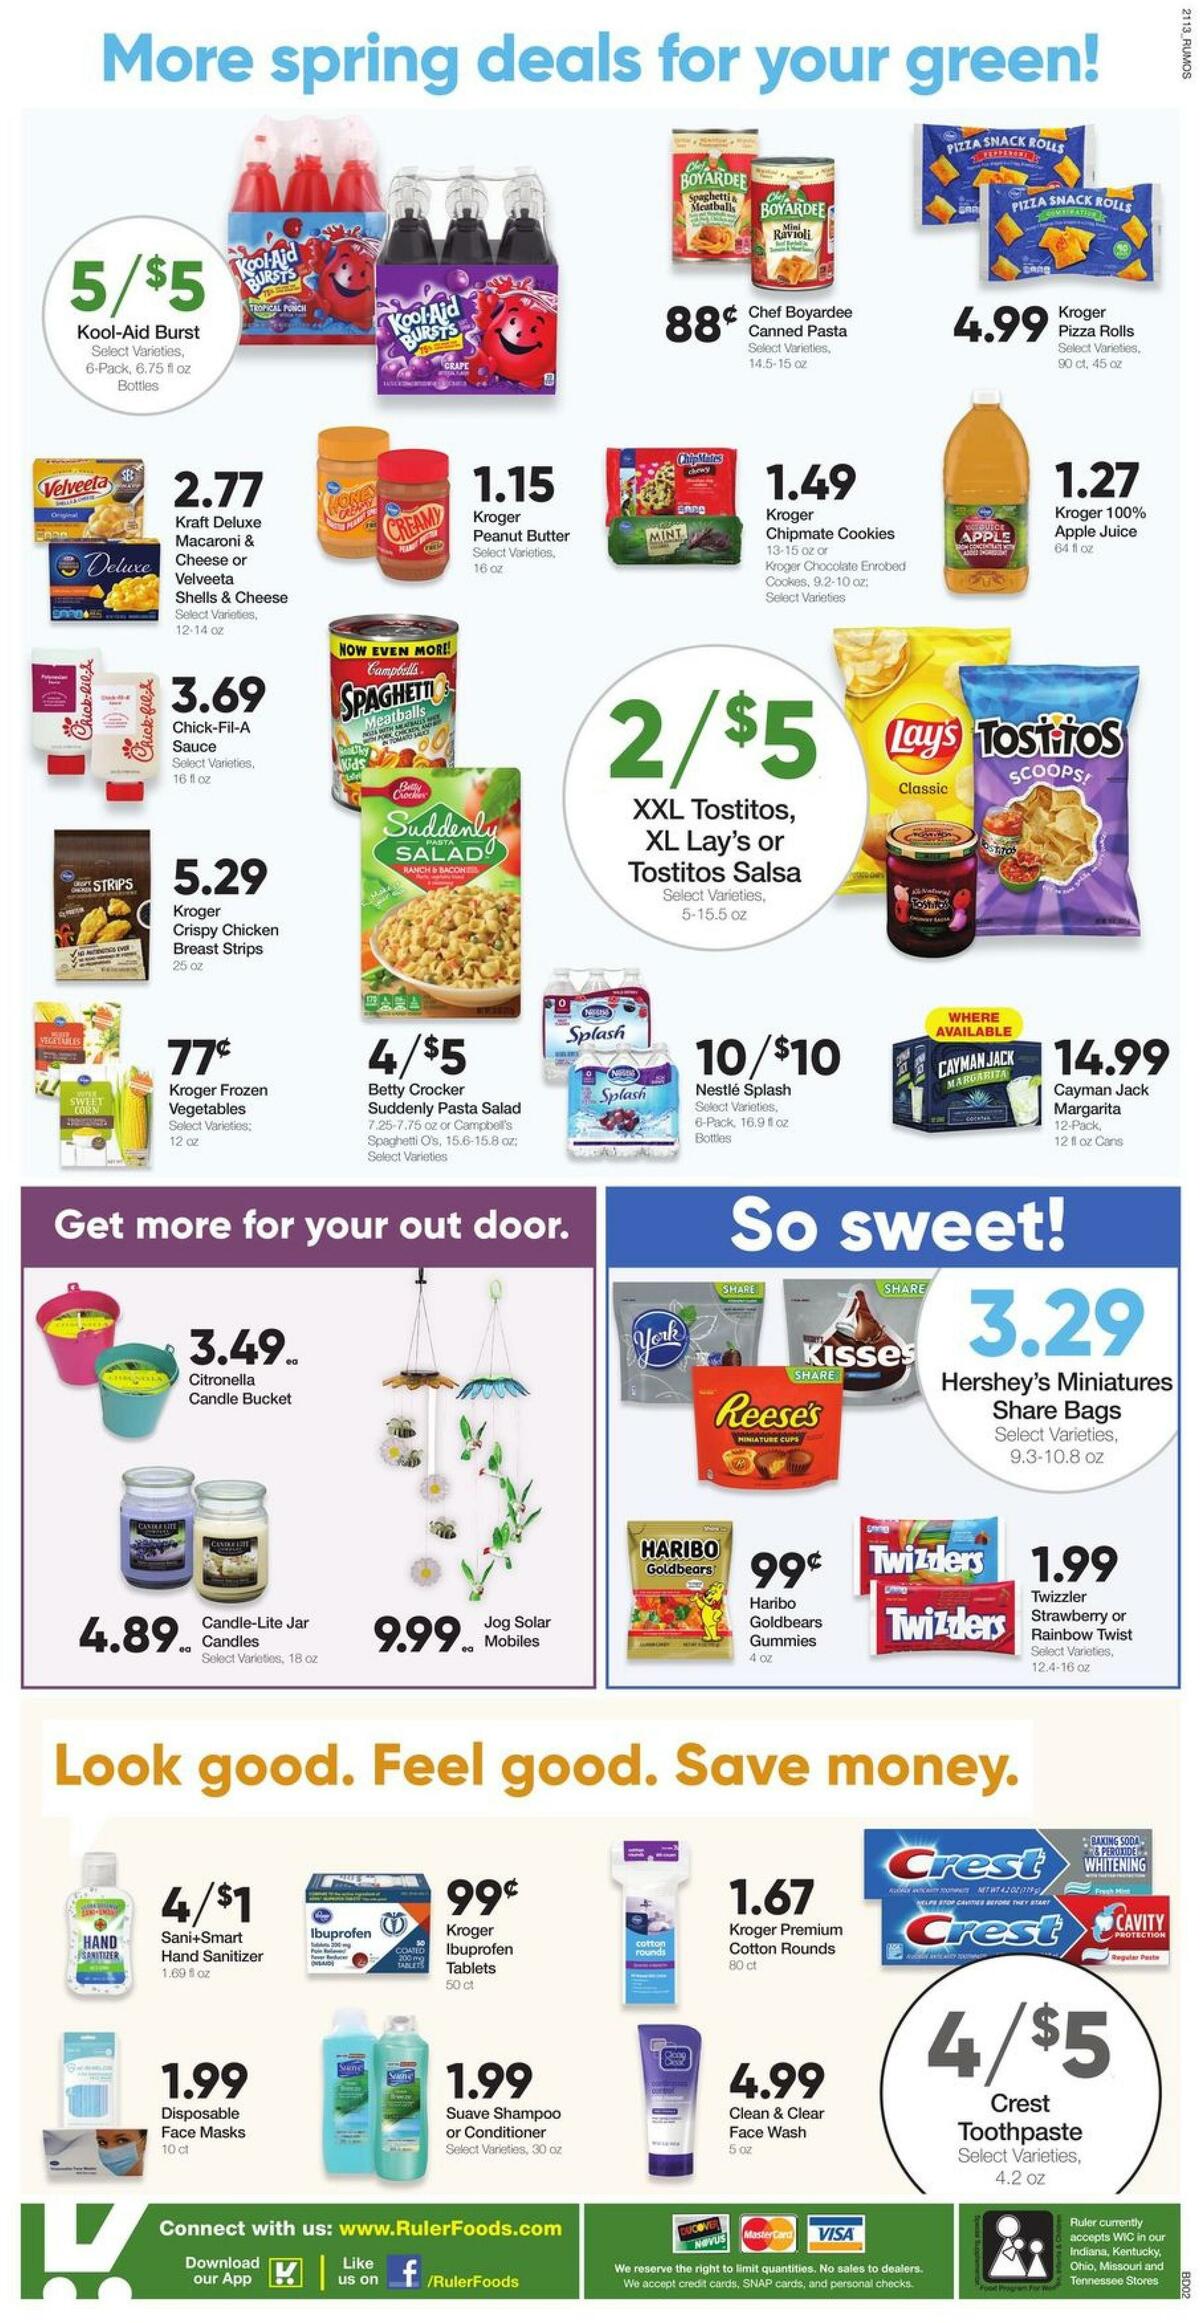 Ruler Foods Weekly Ad from April 28